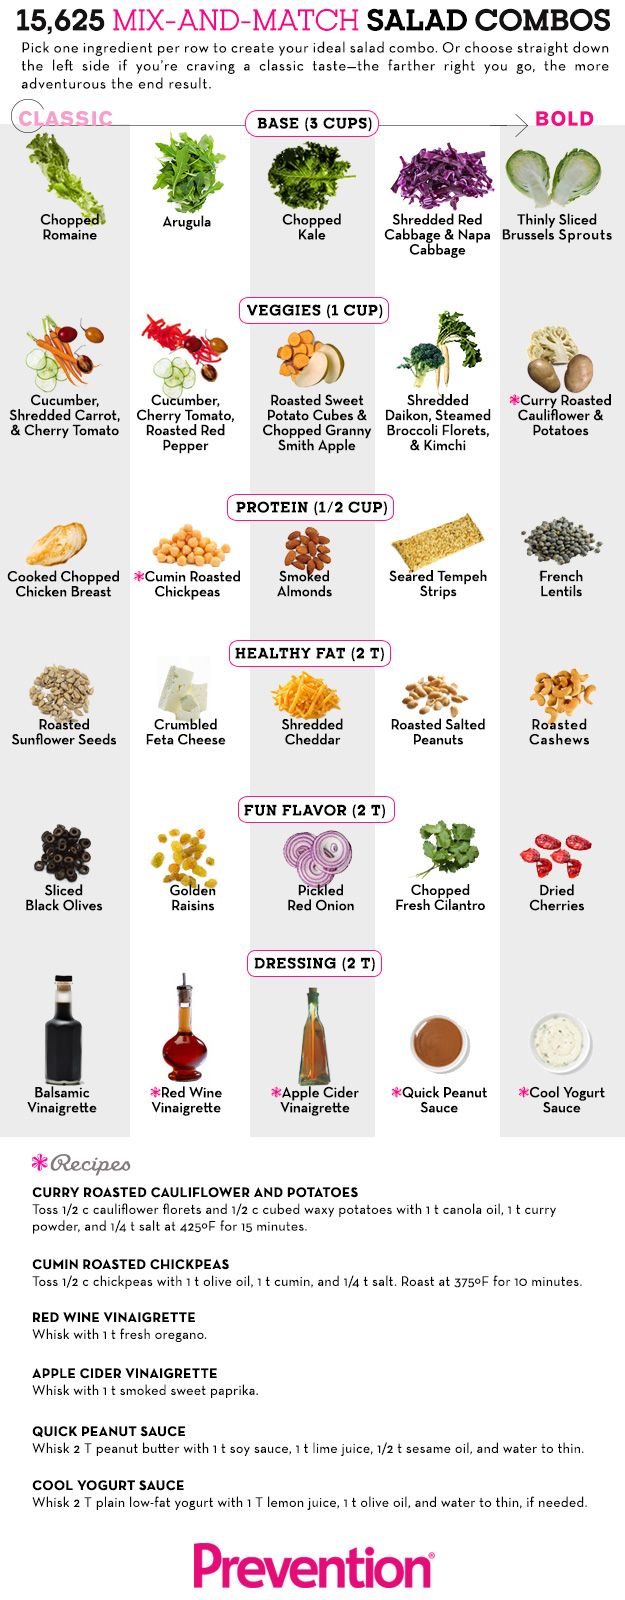 Salad Combos with Homemade Sauce Recipes | Diagrams For Easier Healthy Eating